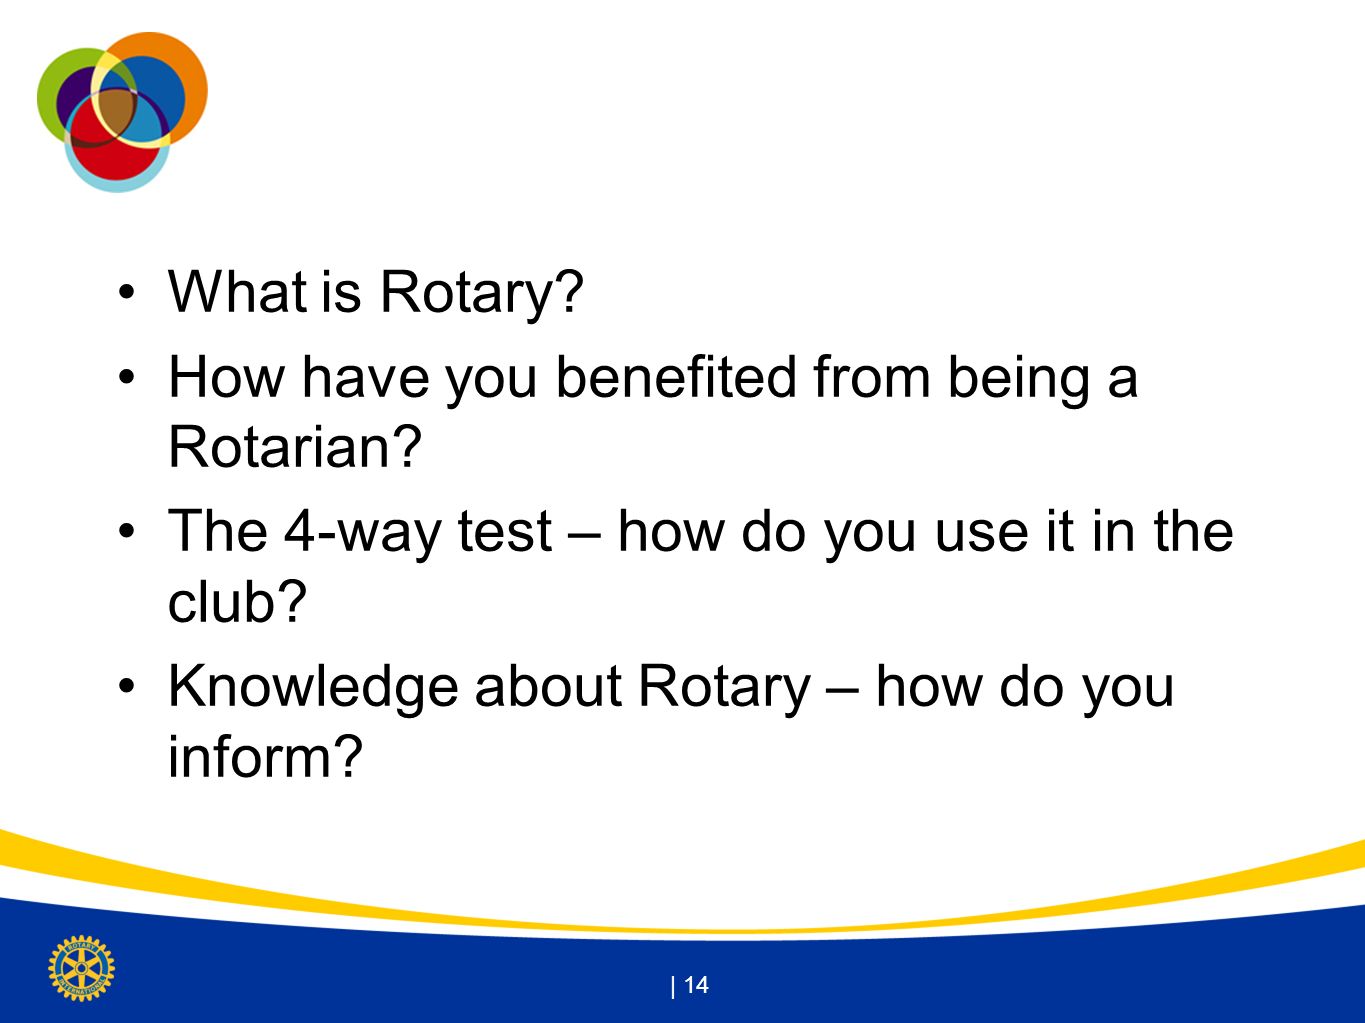 How have you benefited from being a Rotarian